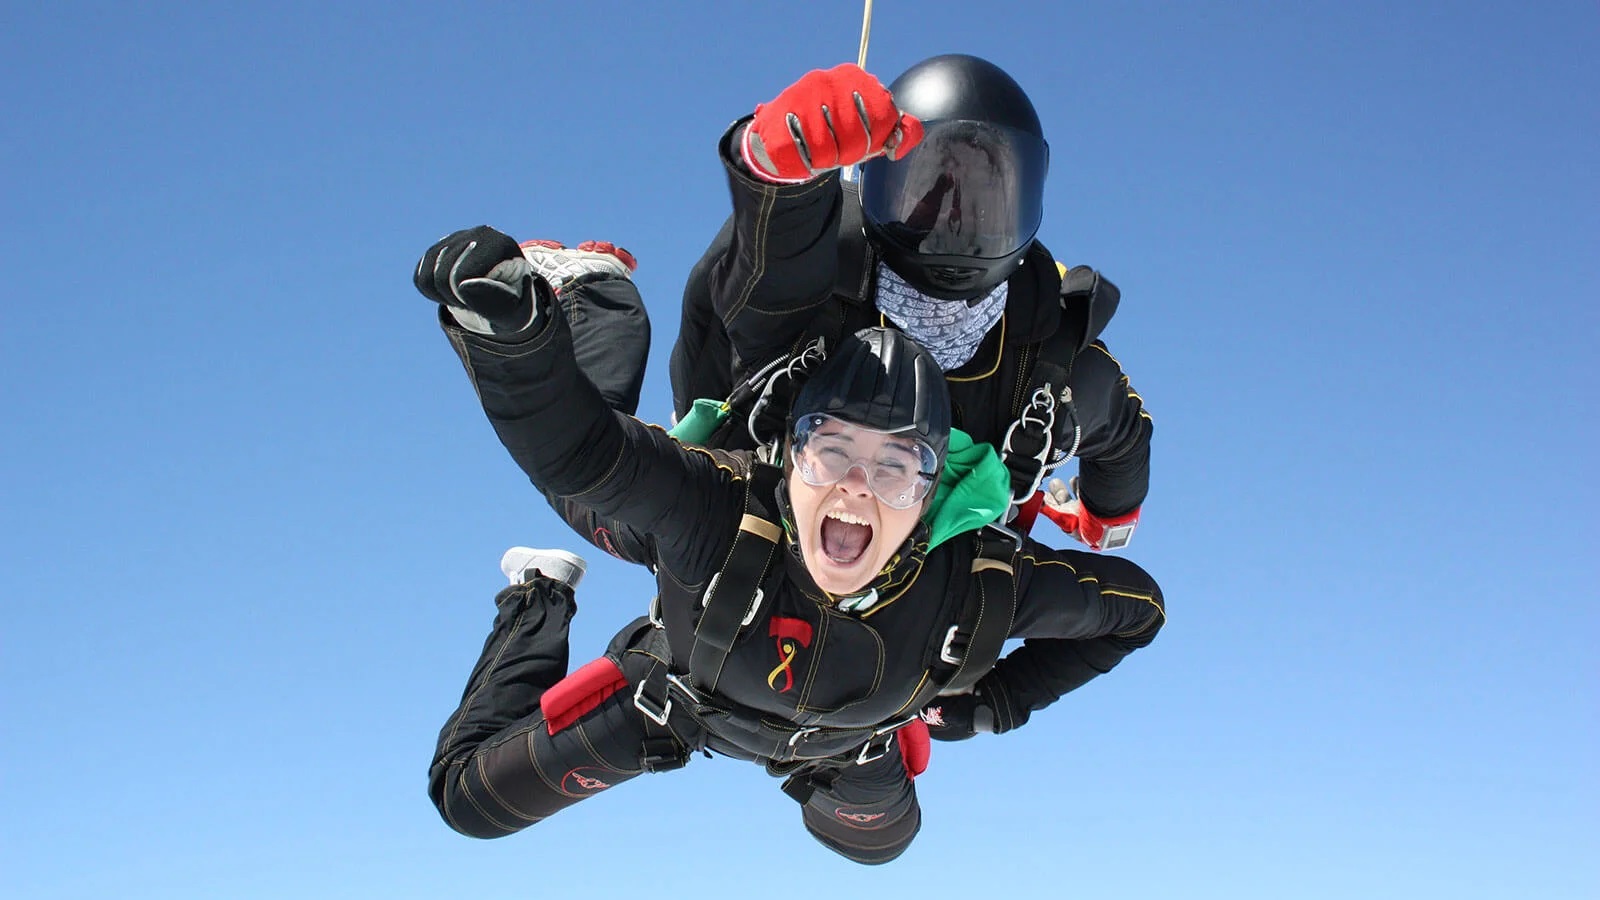 16-astonishing-facts-about-skydive-for-charity